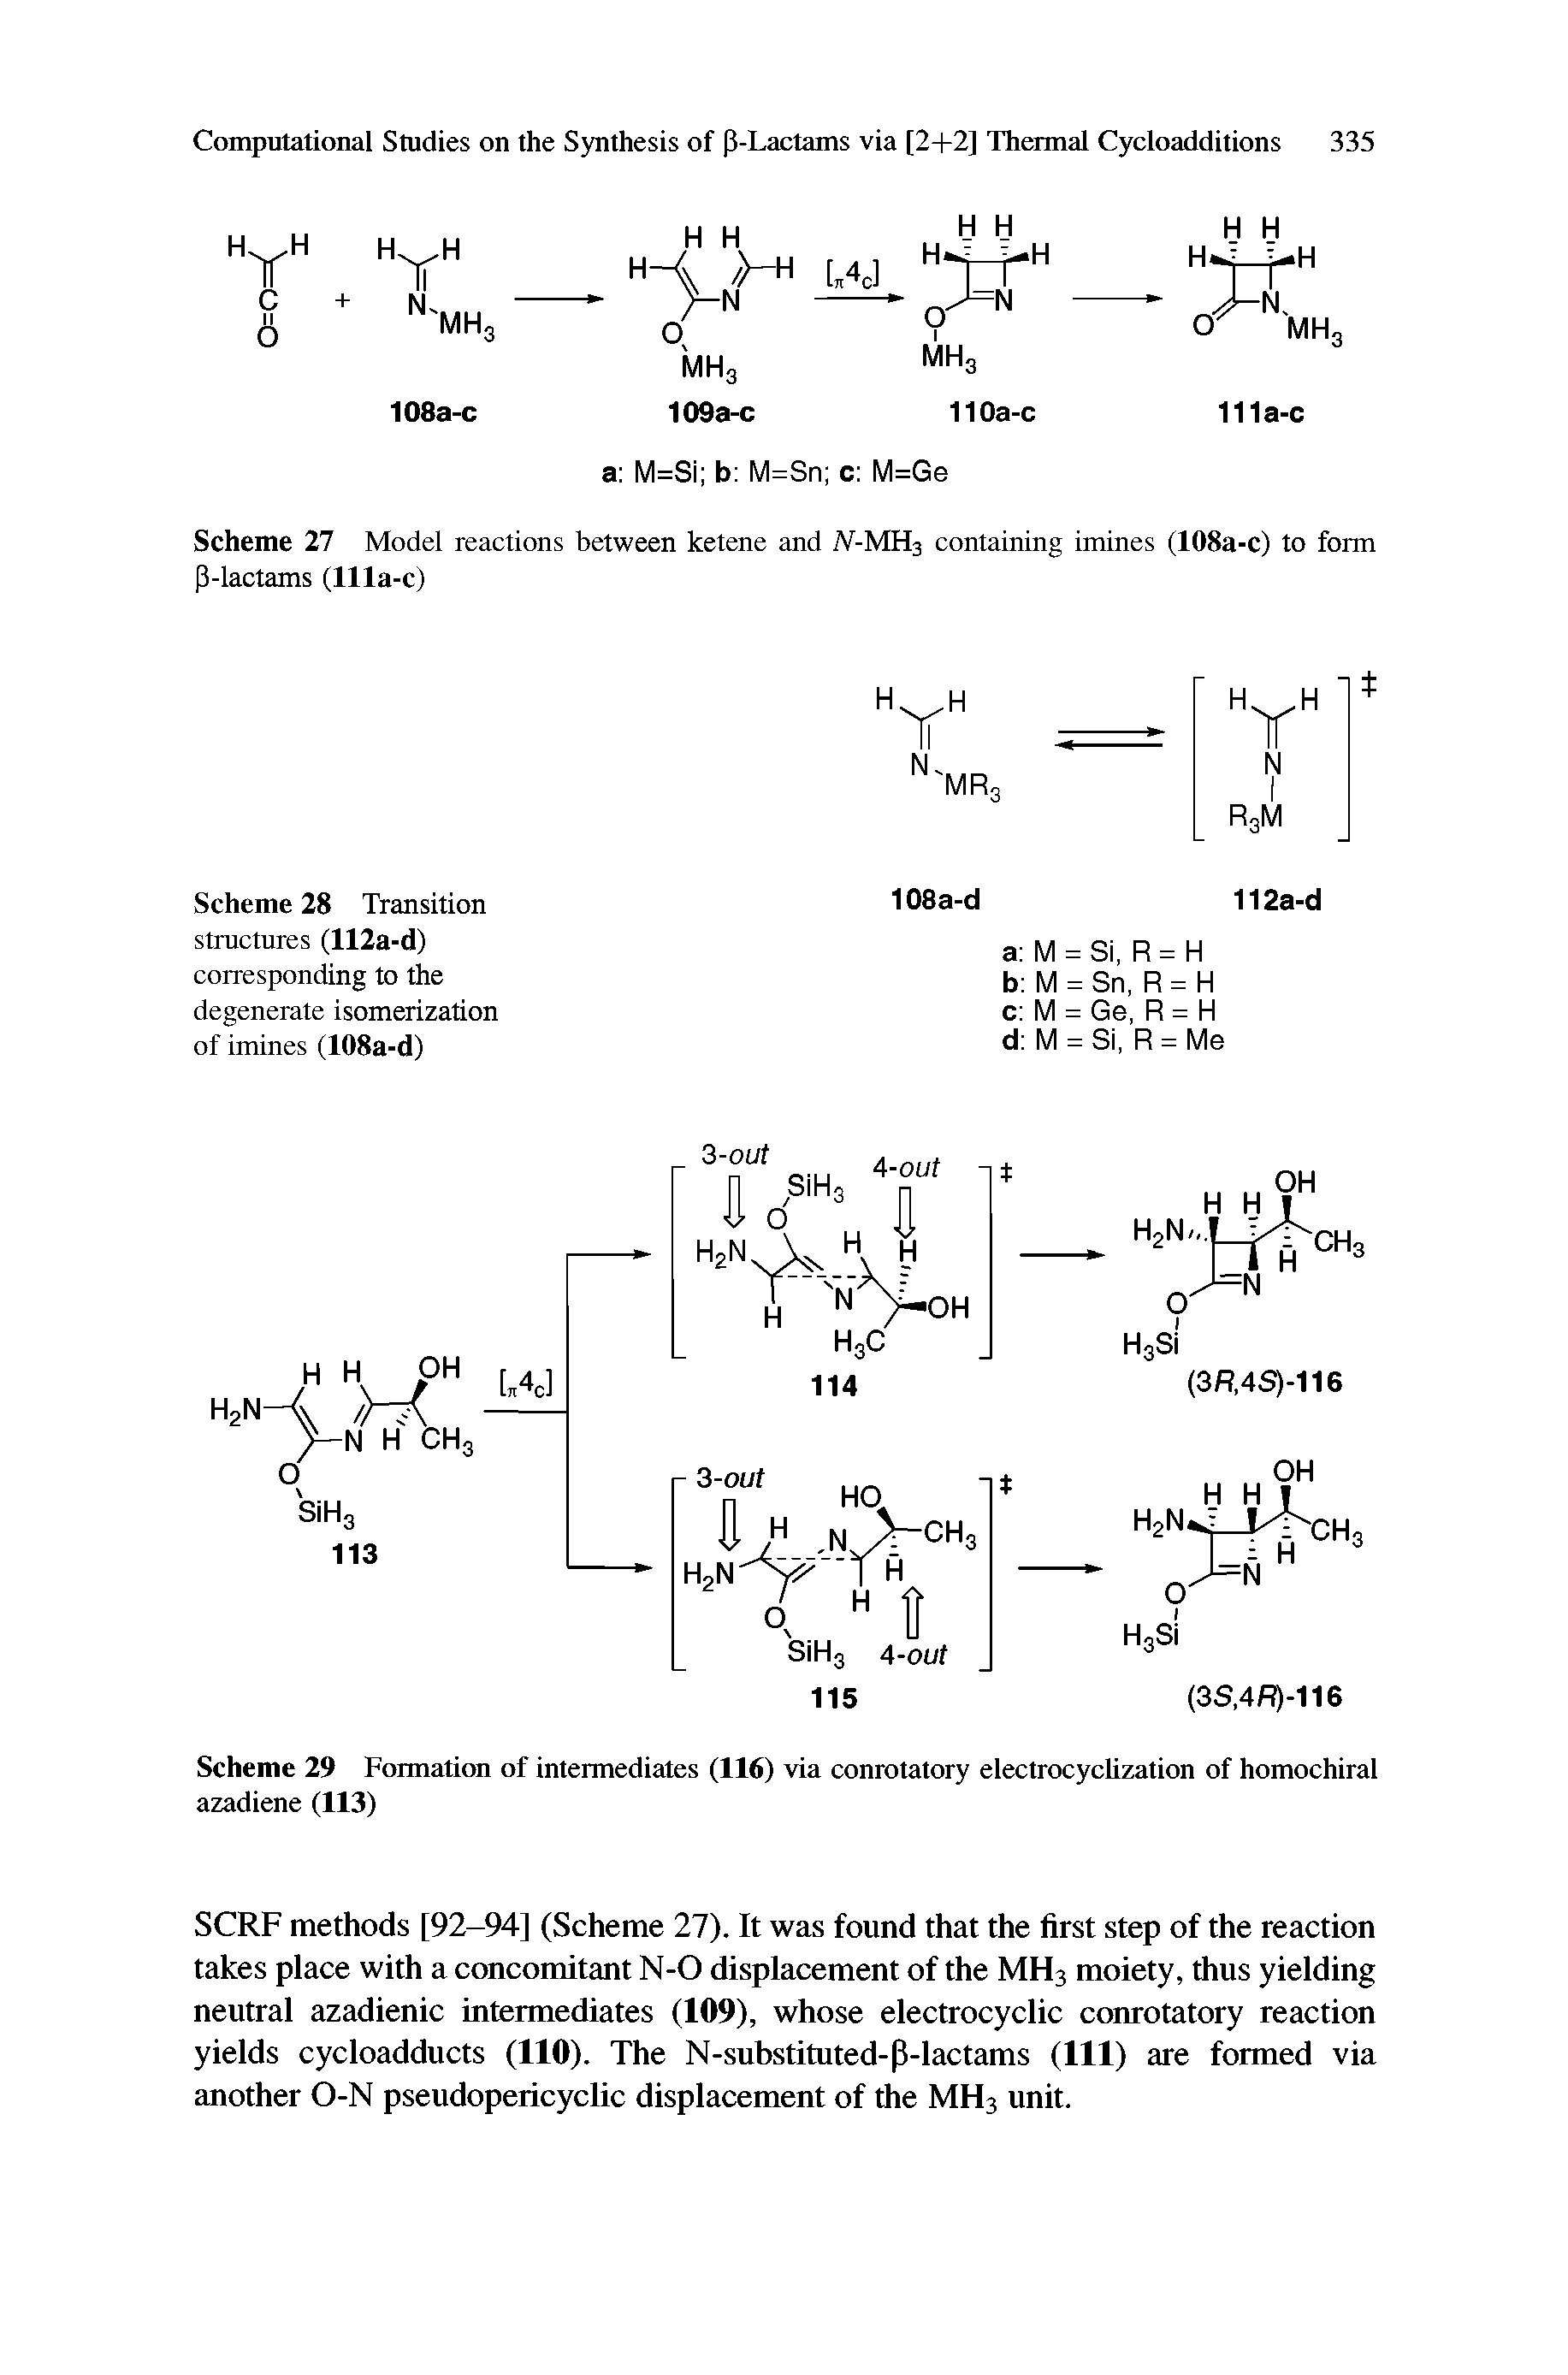 Scheme 27 Model reactions between ketene and IV-MH3 containing imines (108a-c) to form P-lactams (llla-c)...